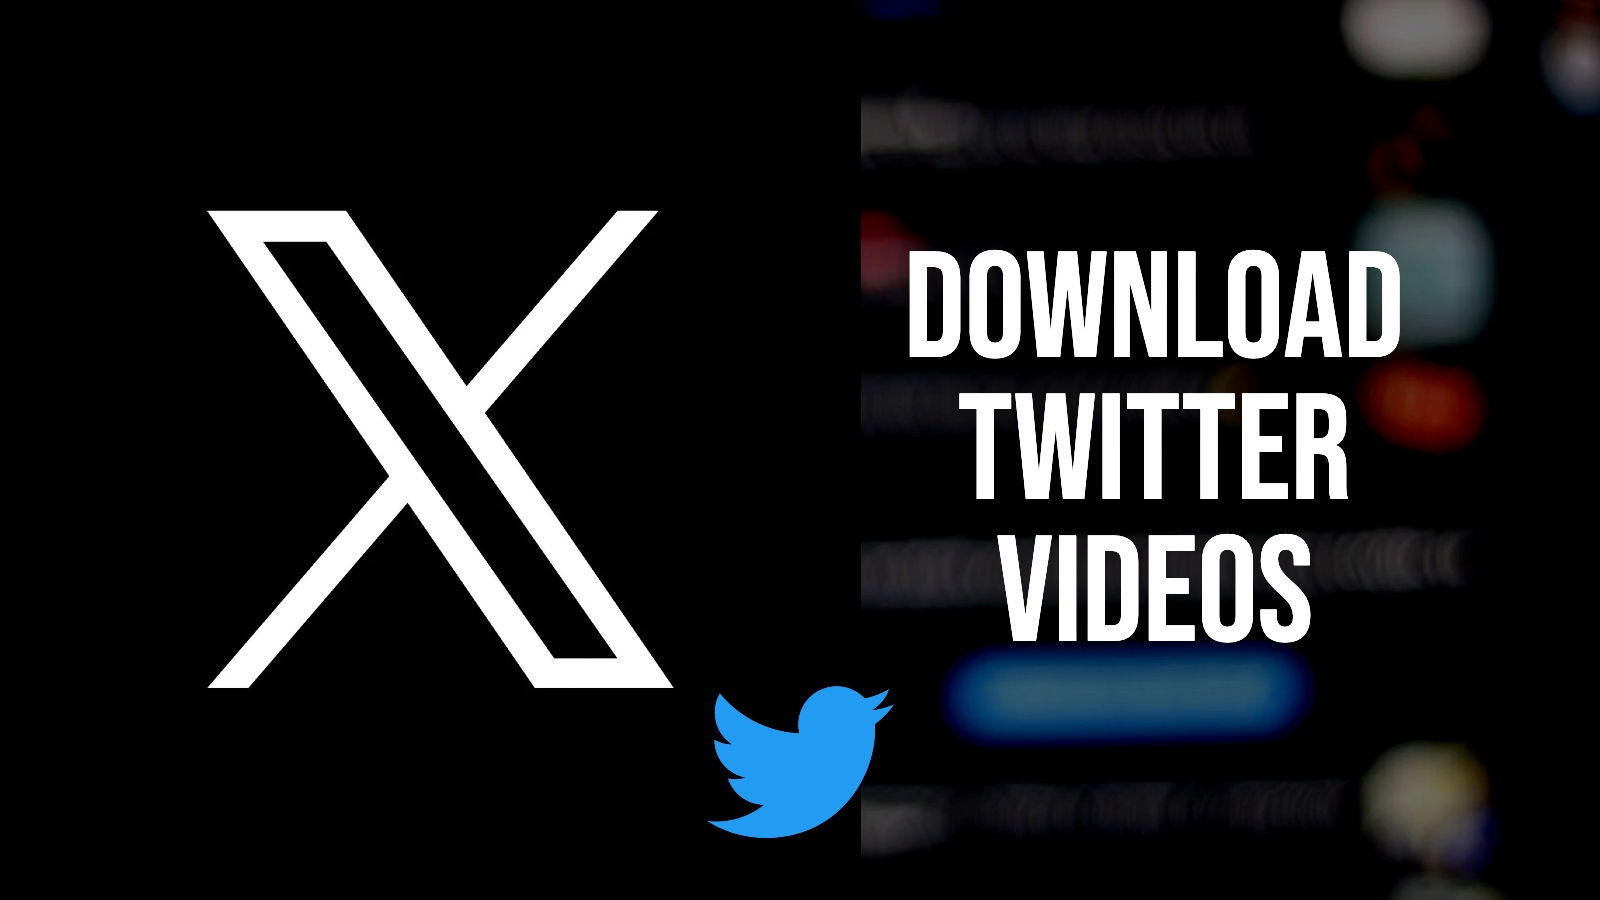 Xx Xdownload Video - How to download Twitter / X videos straight from the app - Dexerto